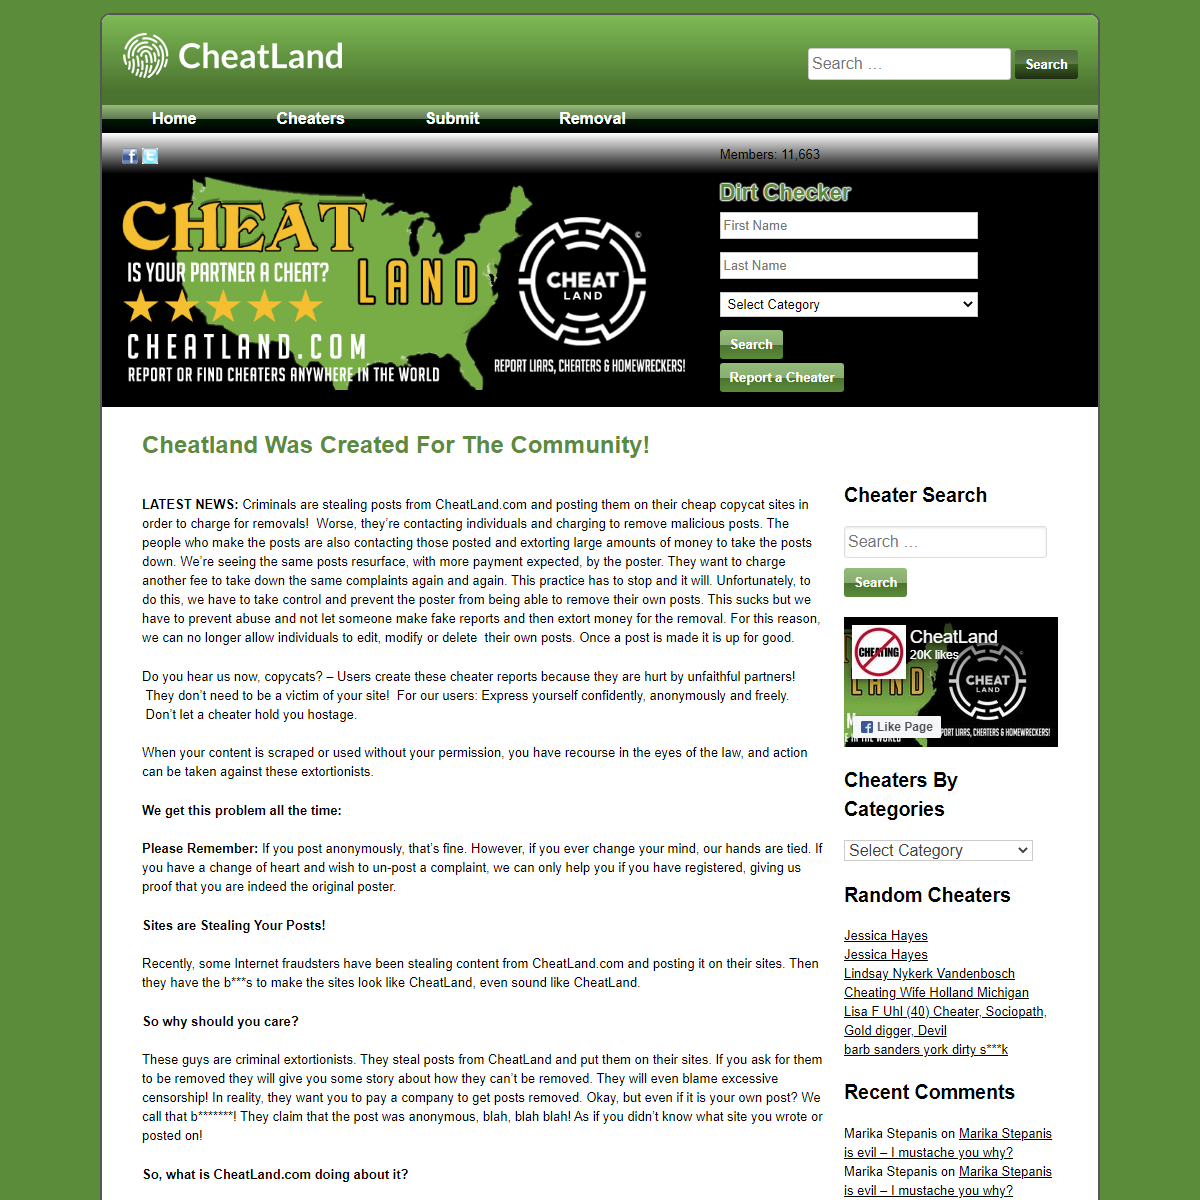 A complete backup of http://www.cheatland.com/cheatland-was-created-for-the-community.html